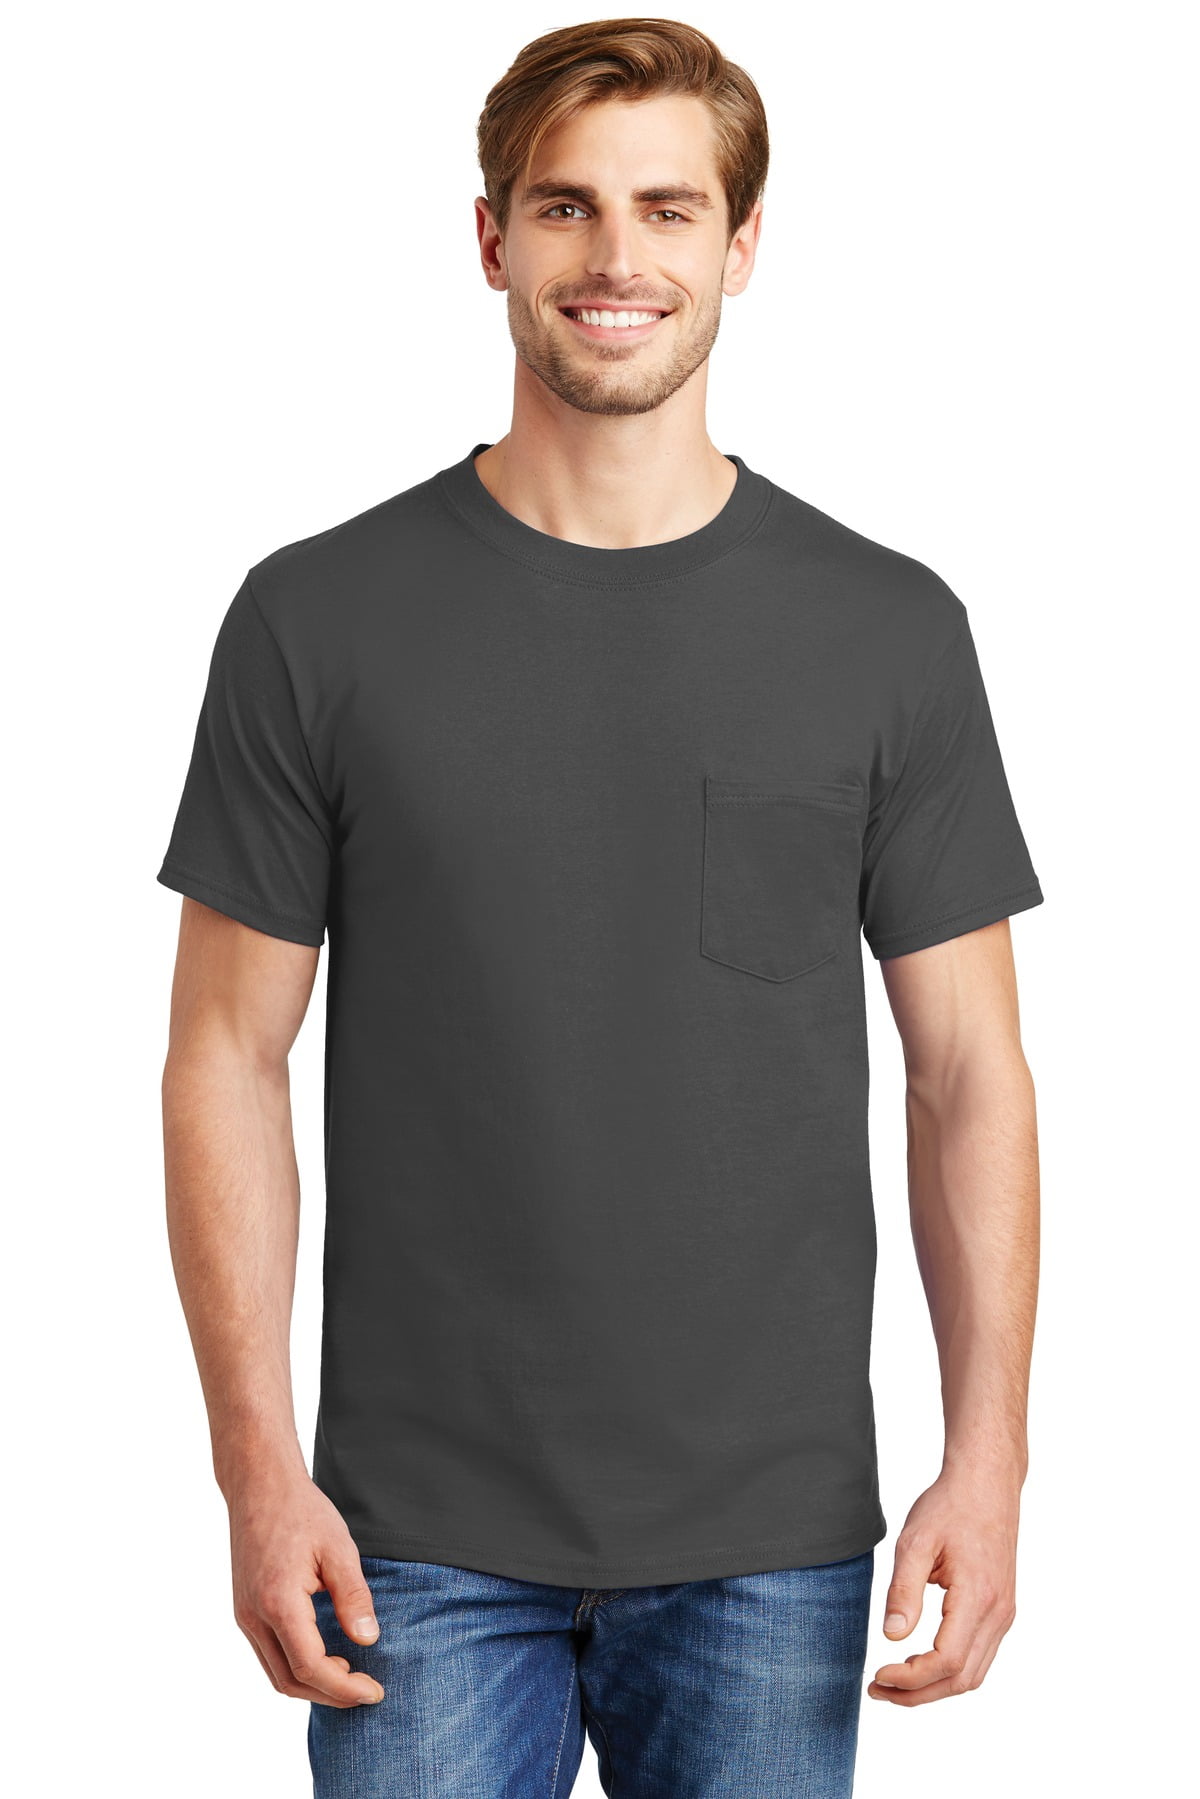 Hanes Hanes Beefy T 100 Cotton T Shirt With Pocket